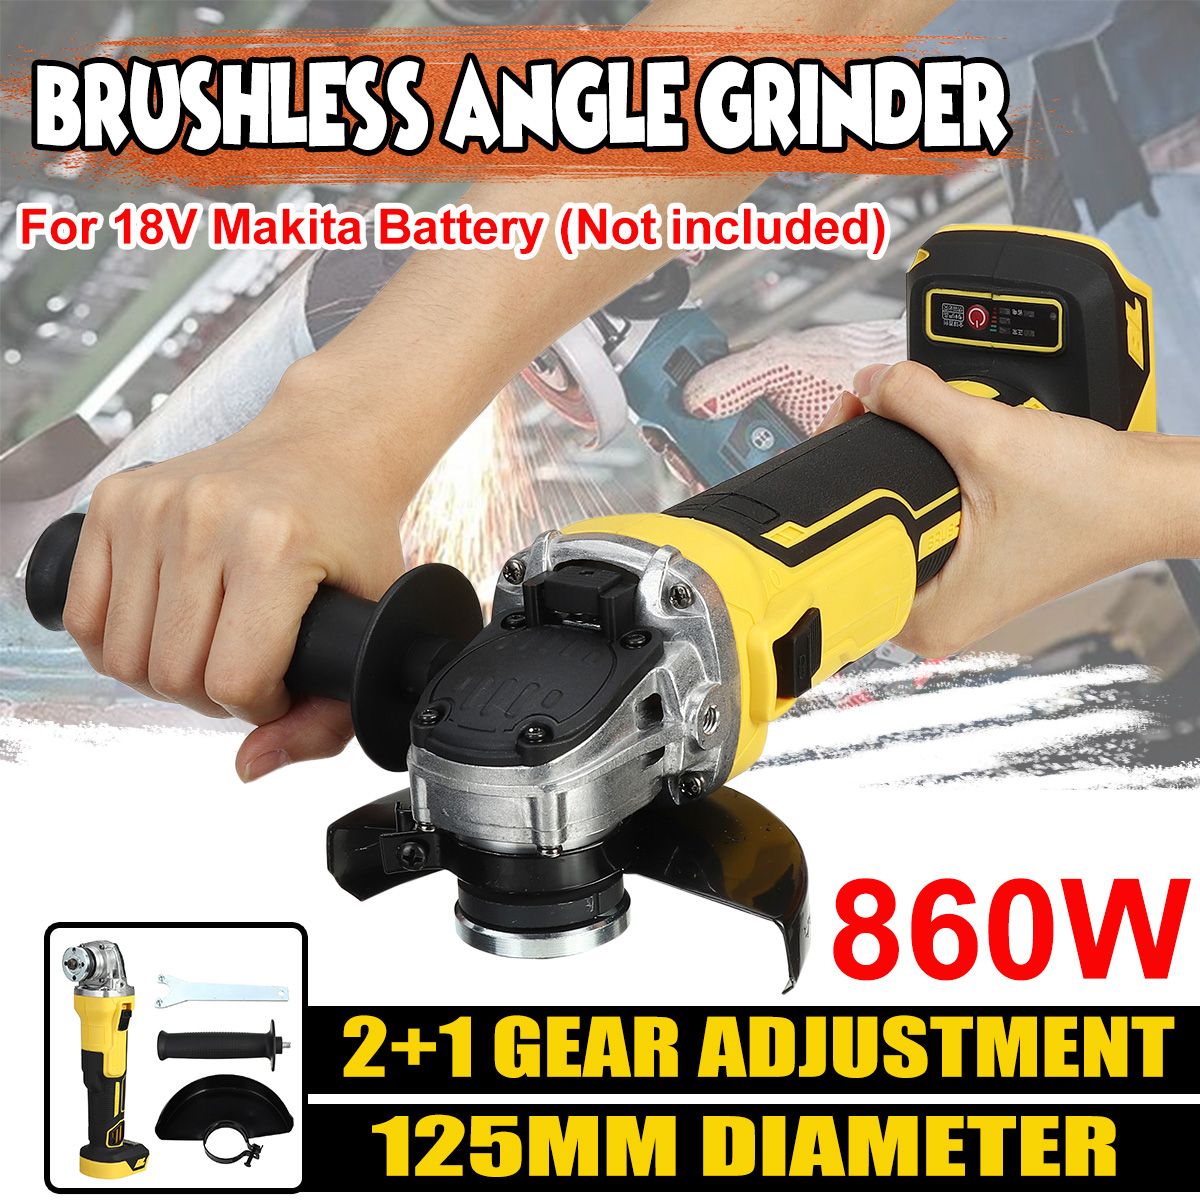 125mm-Brushless-Rechargeable-Angle-Grinder-Electric-Polishing-Cutting-Machine-For-Makita-18V-Battery-1751312